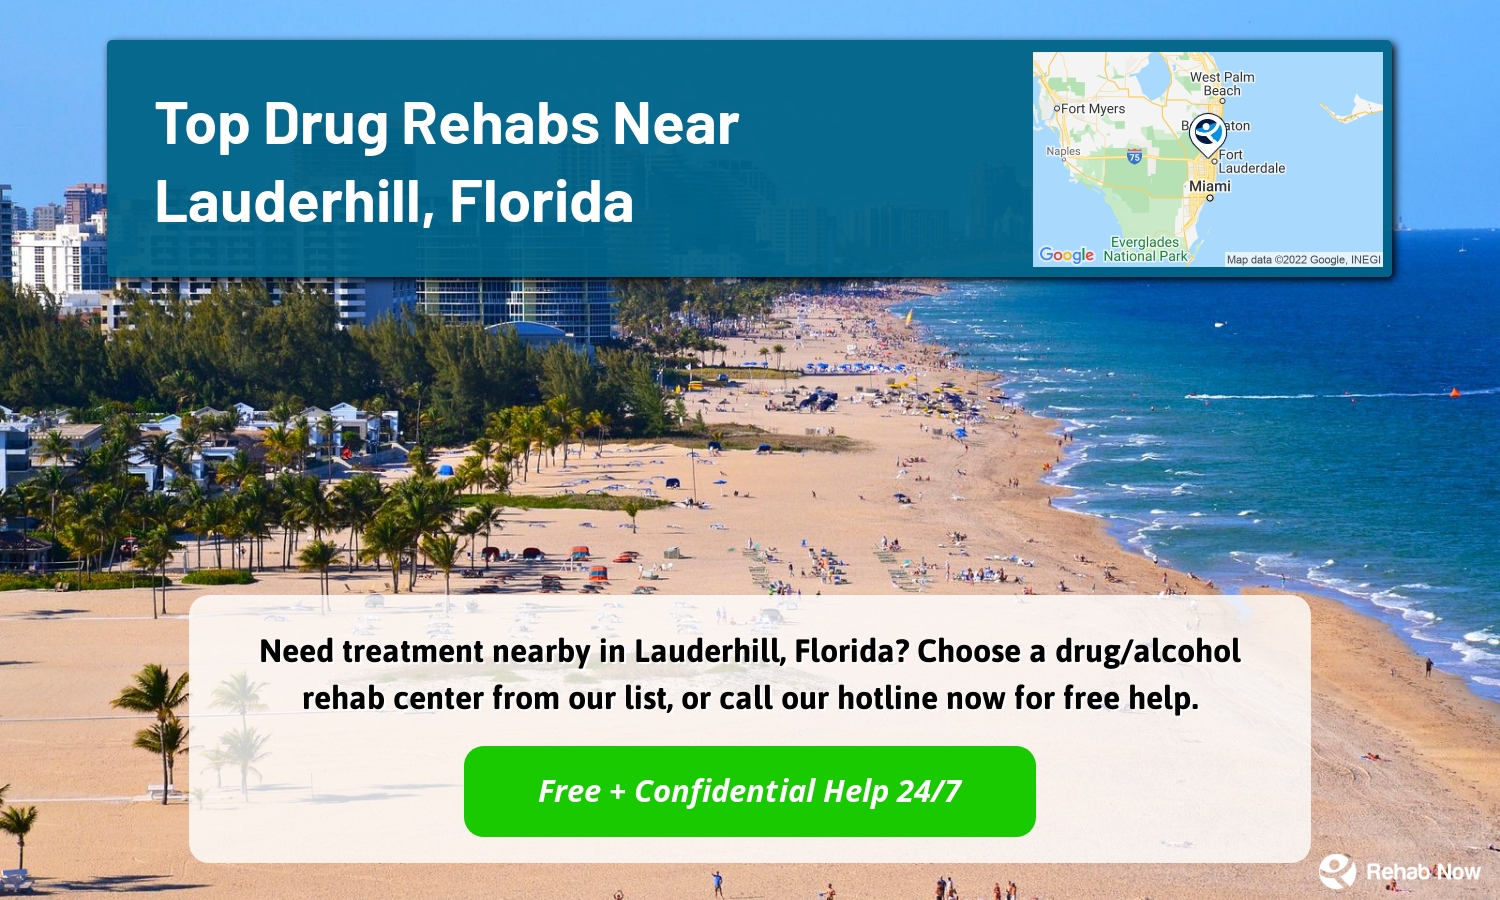 Need treatment nearby in Lauderhill, Florida? Choose a drug/alcohol rehab center from our list, or call our hotline now for free help.